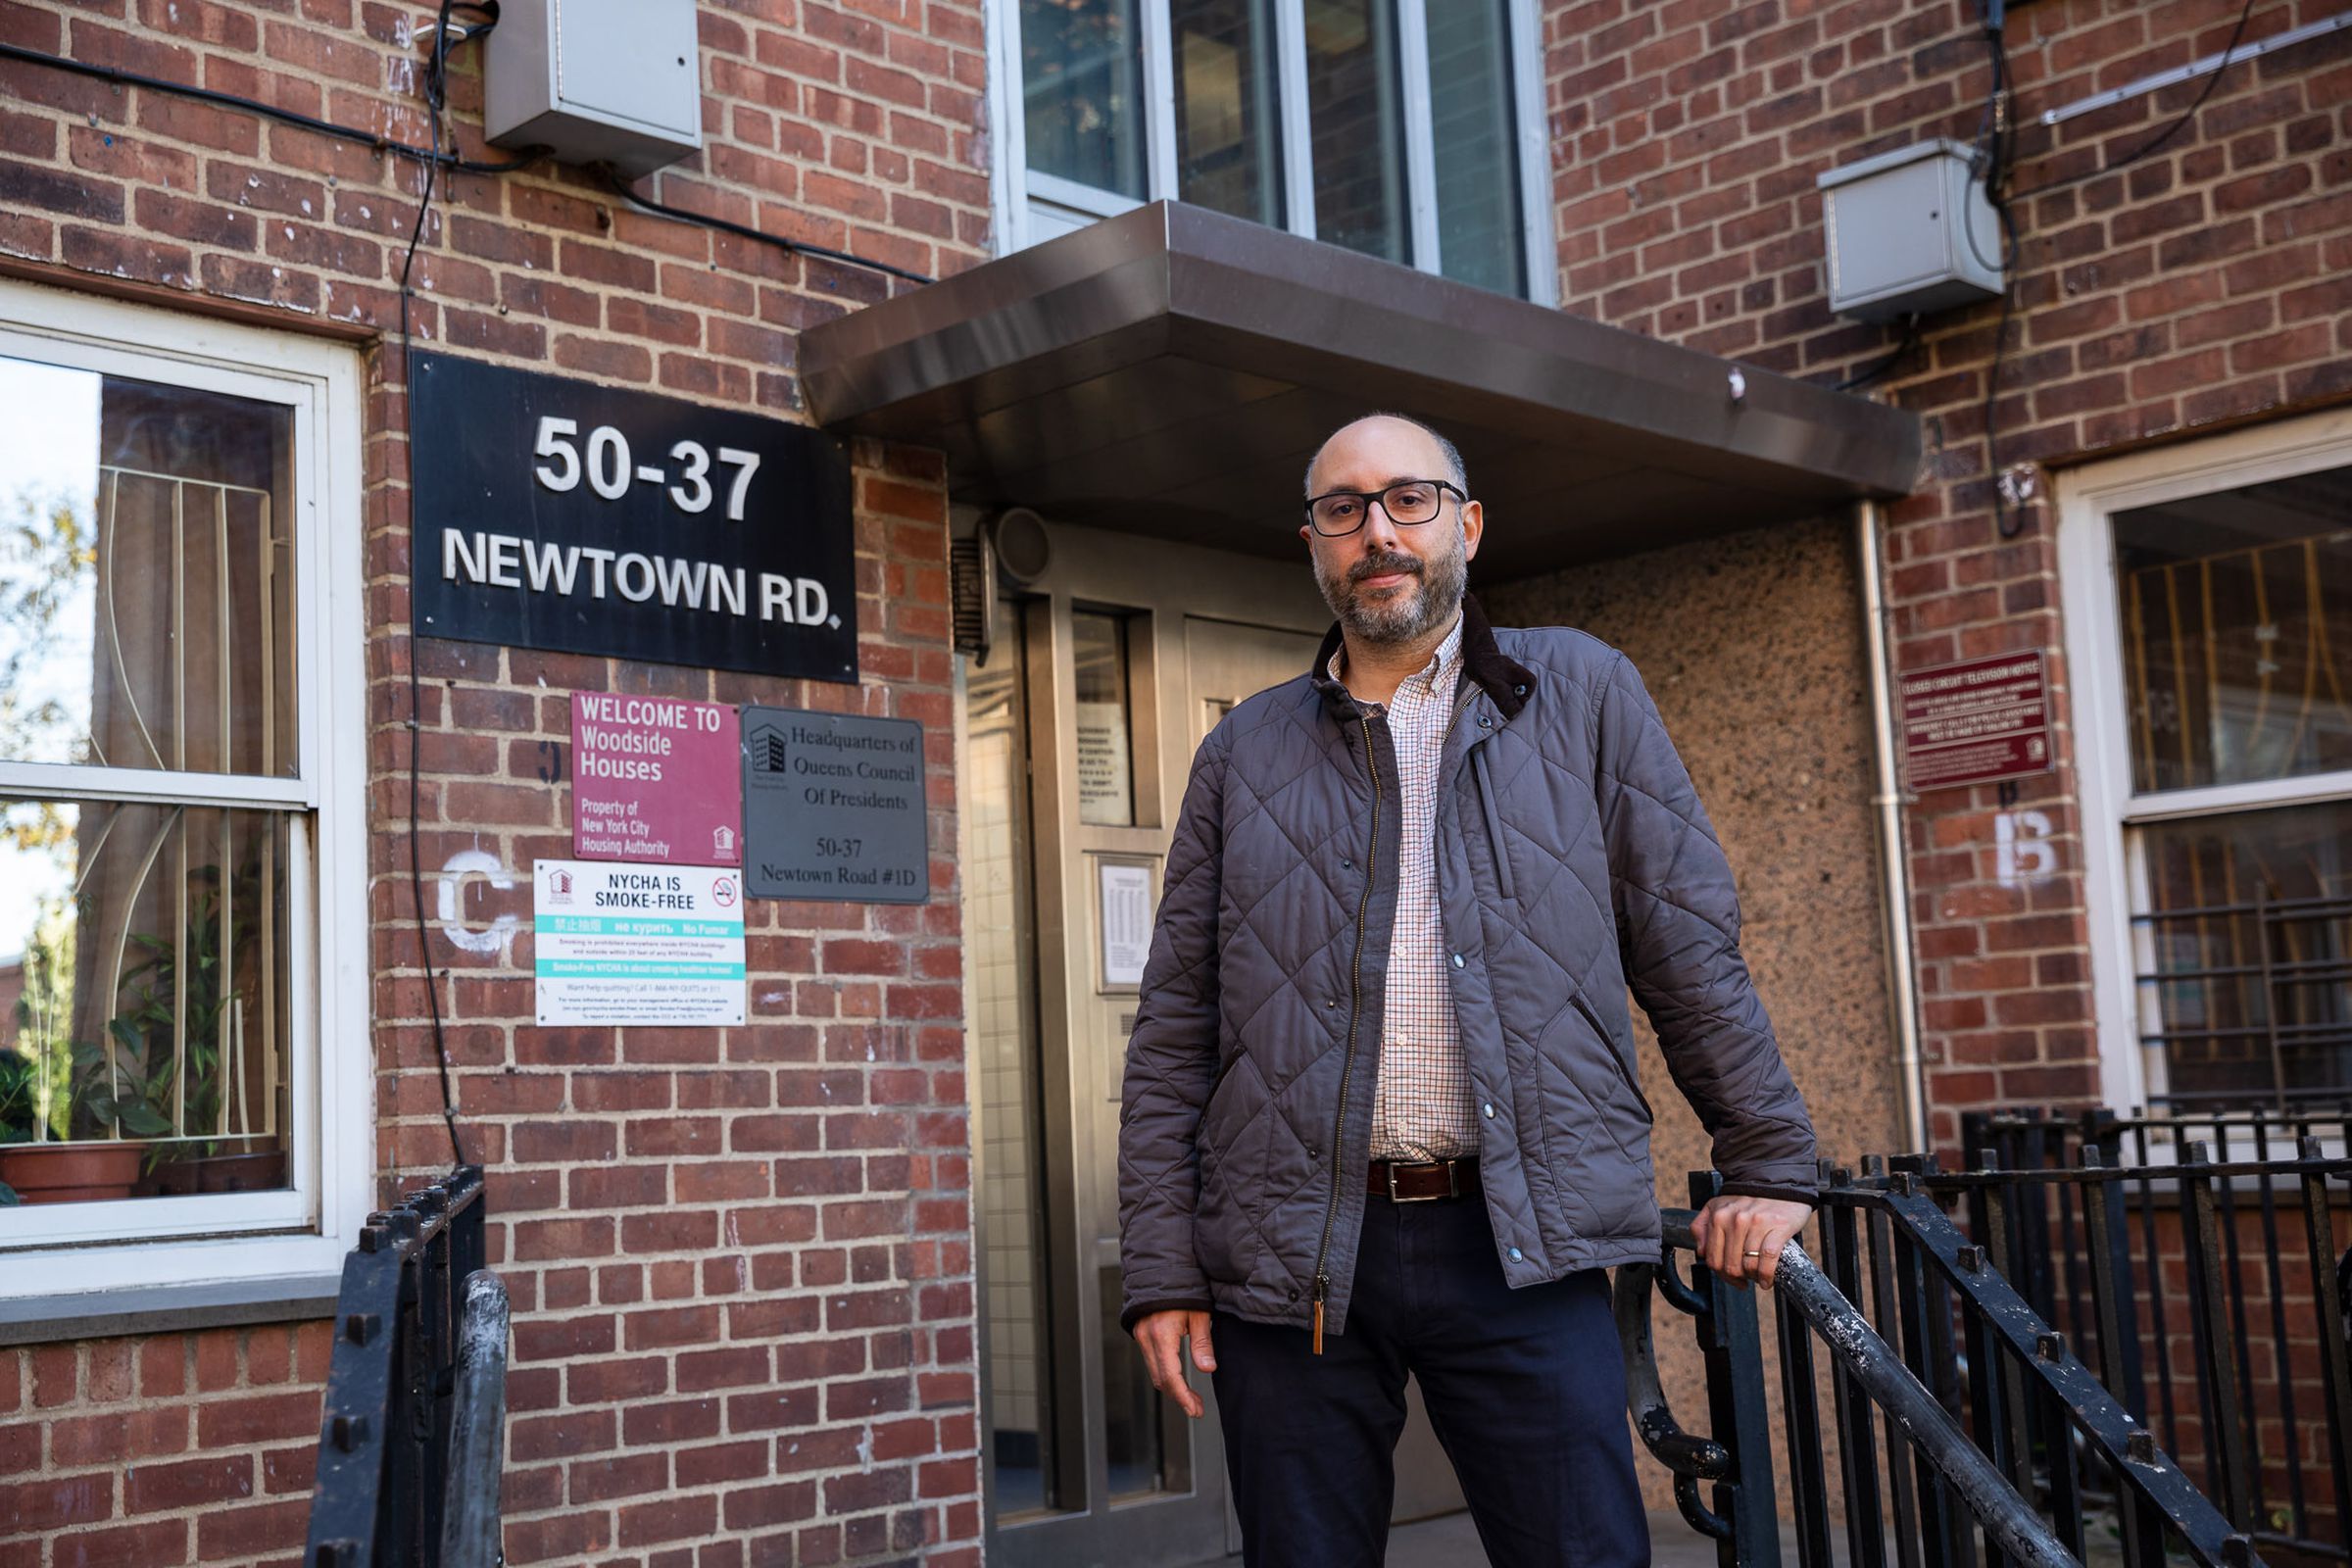 A man wearing a jacket and glasses stands in front of the door to an apartment building.